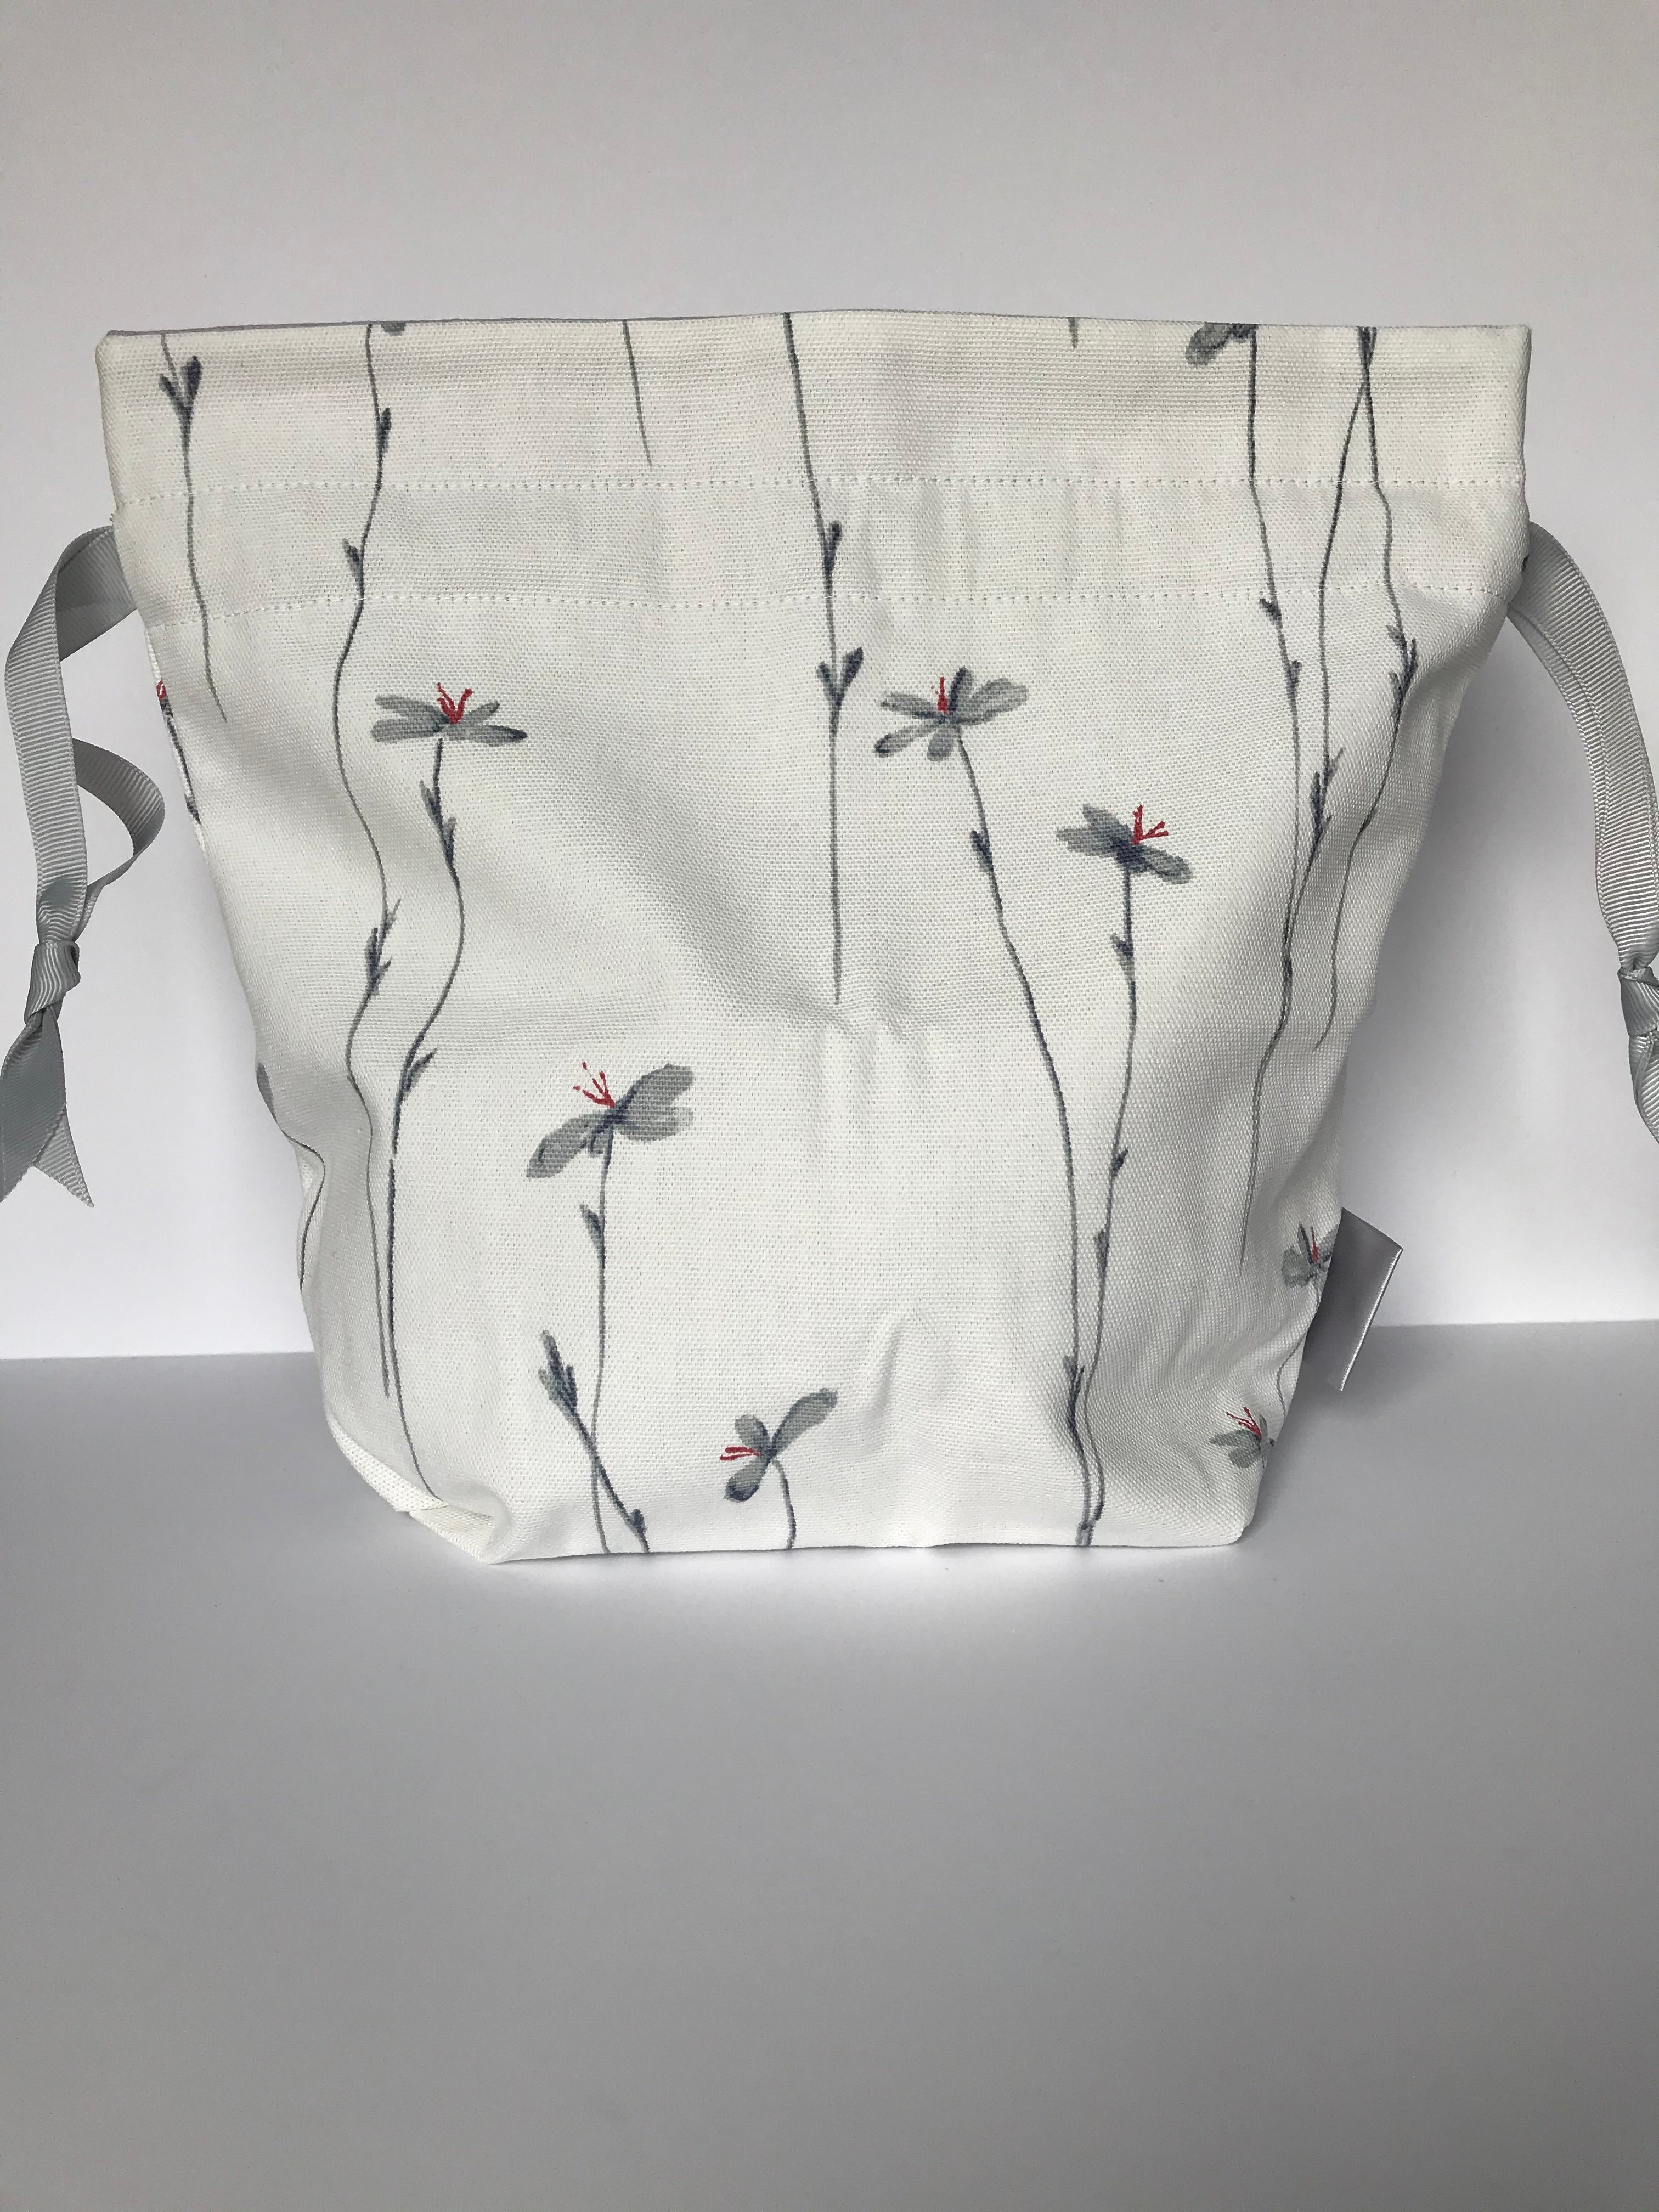 Small Drawstring Bag - White with floral design